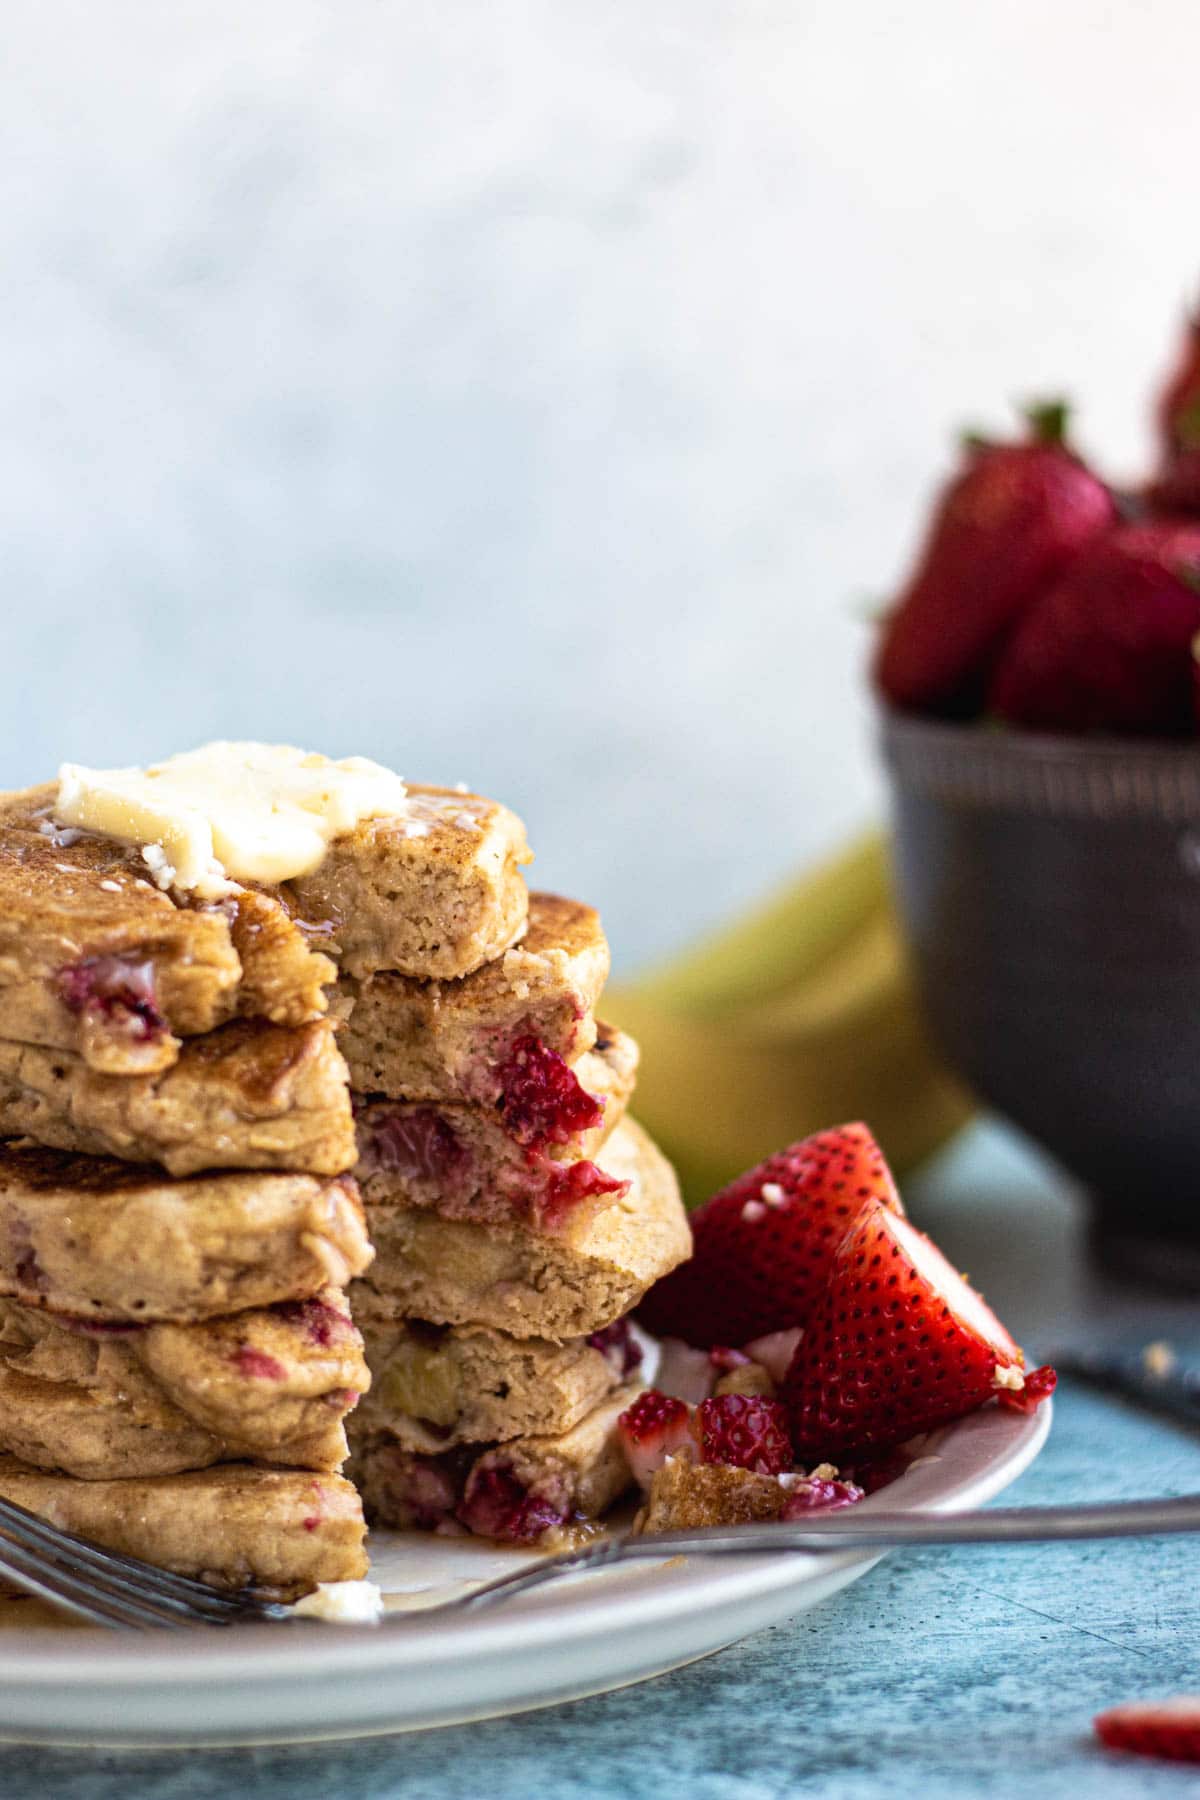 A stack of strawberry banana pancakes on a plate with a pat of butter on top.  Sliced strawberries on the plate. A bowl of strawberries in the background.